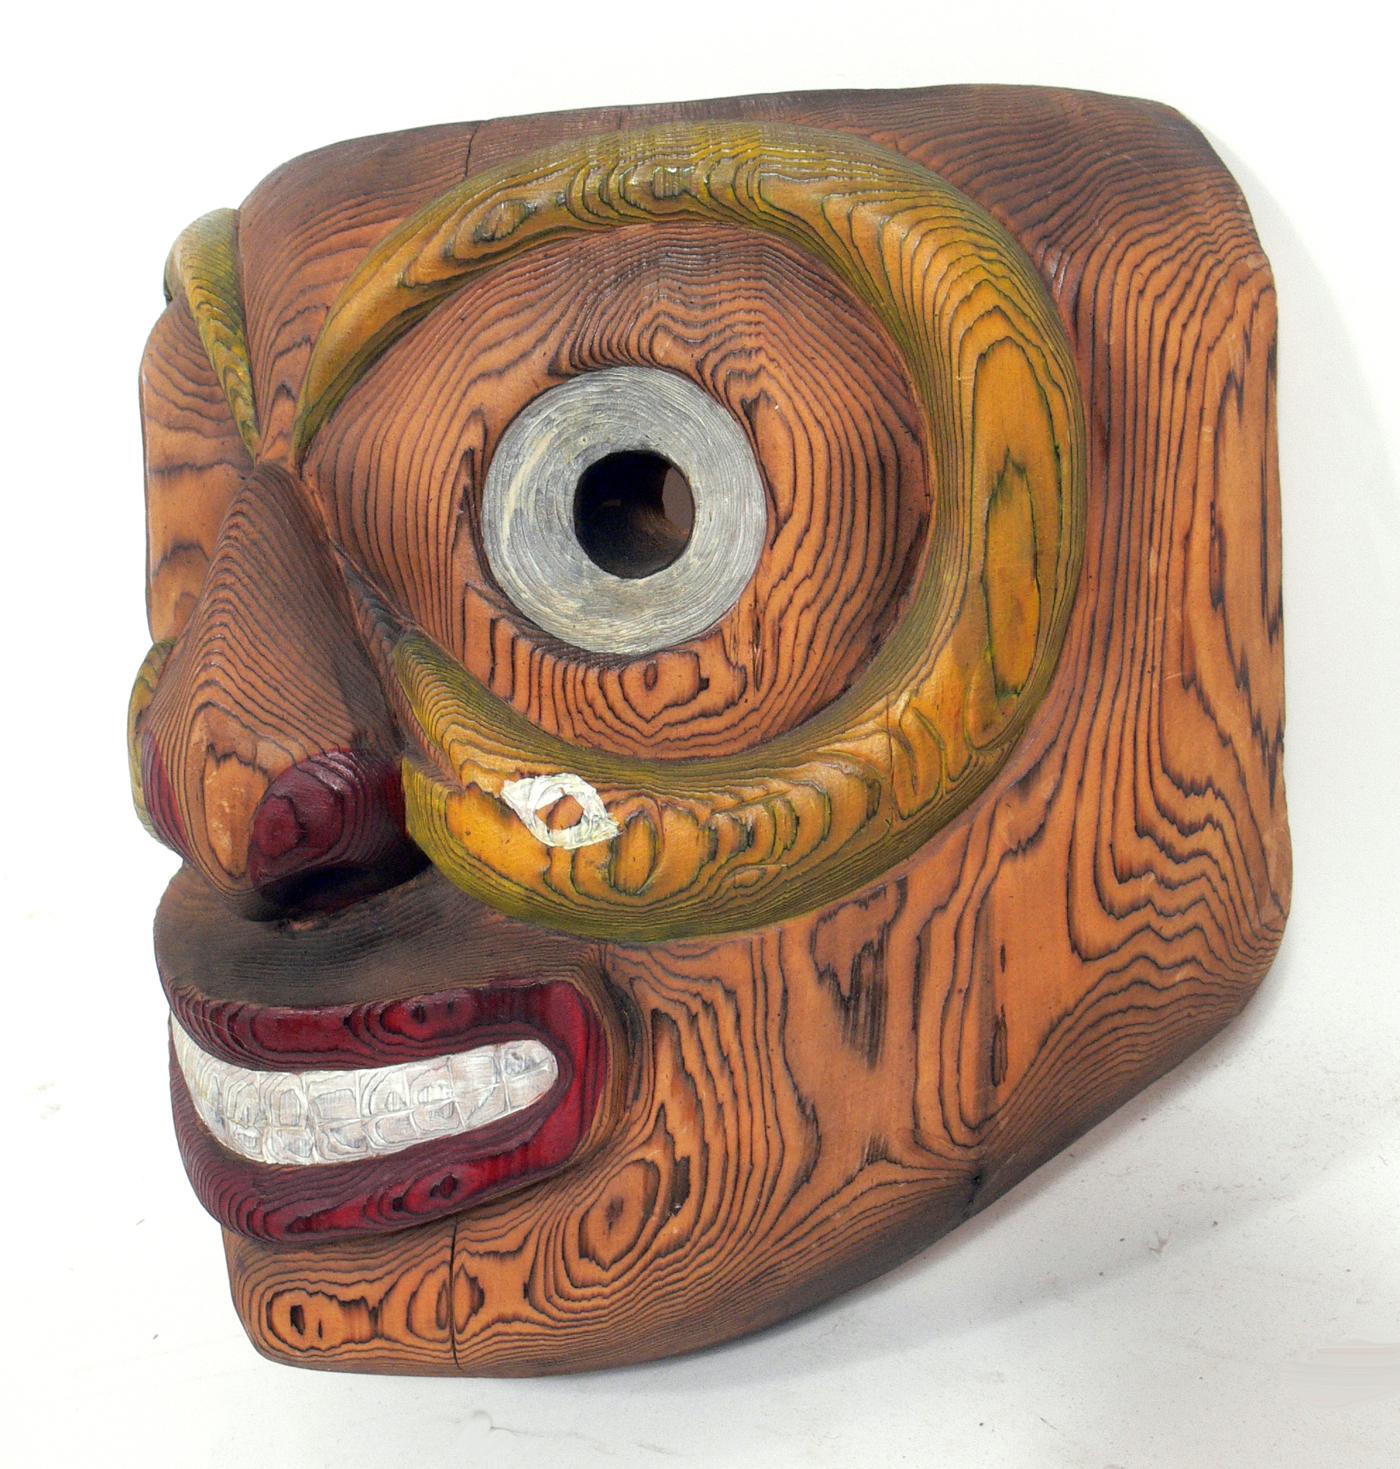 Native American Selection of Pacific Northwest Masks by Bill Bouchard